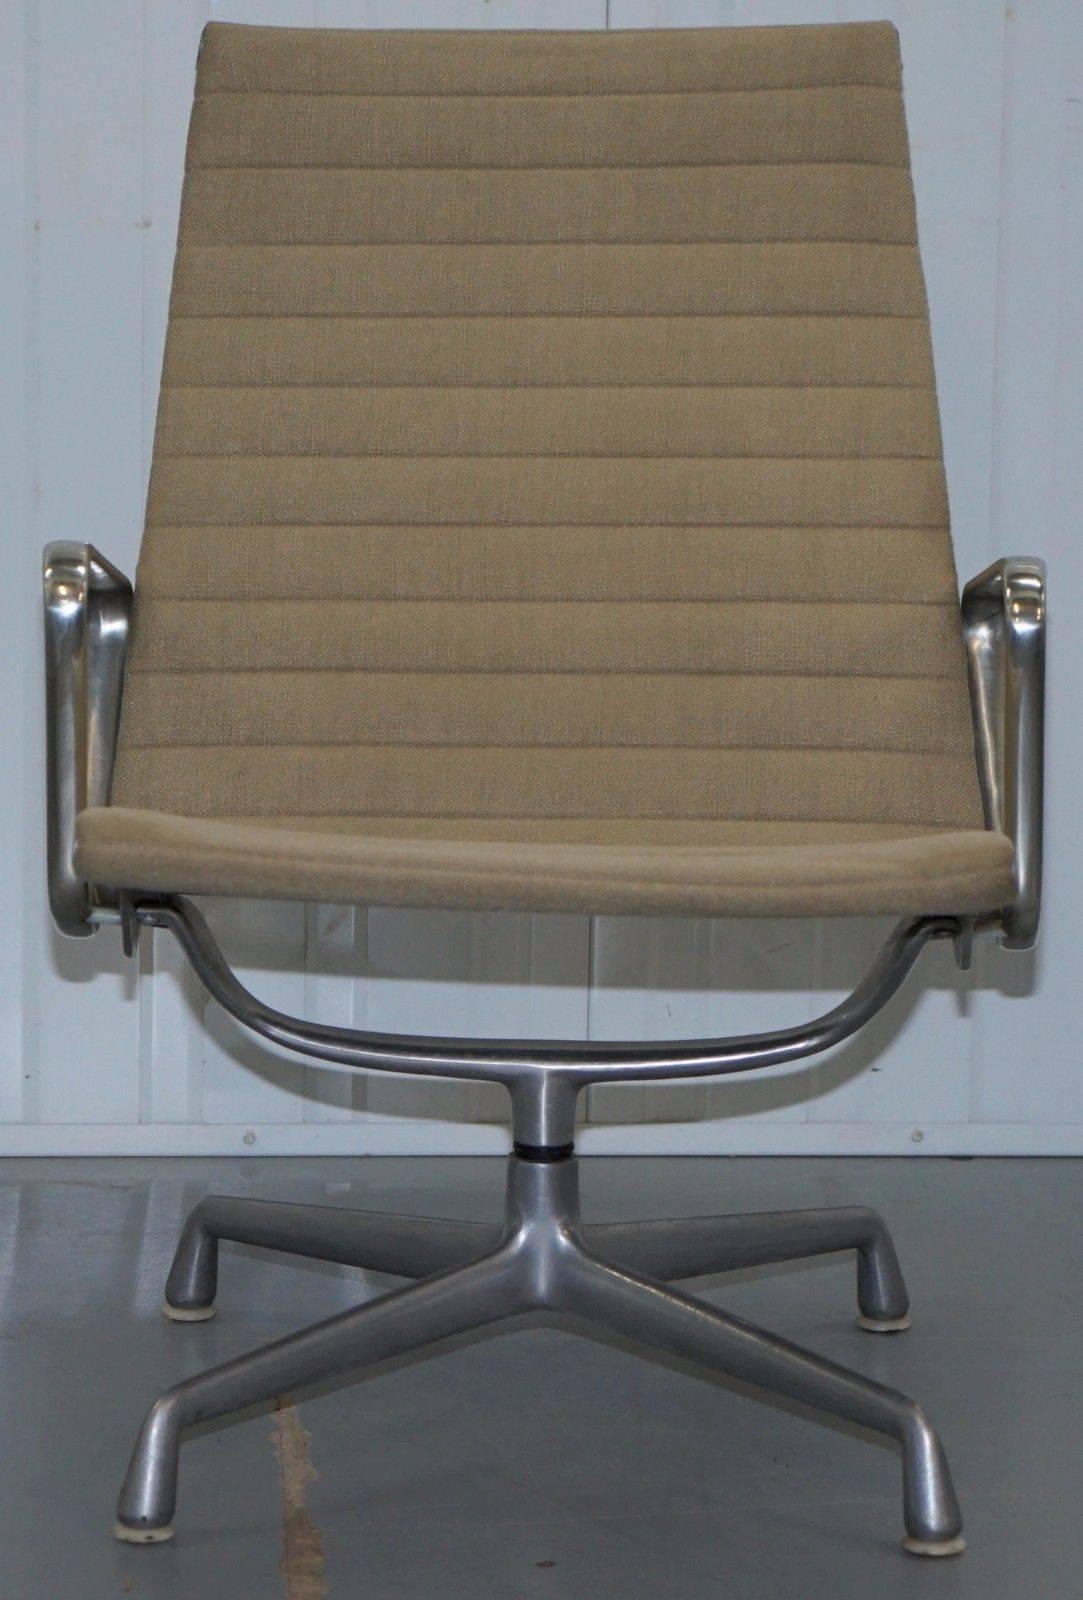 We are delighted to offer for sale one of three this lovely Vitra Eames for Herman Miller EA116 swivel hopsack lounge armchair RRP £2095
 
The EA 116 Aluminium Group easy chair from 1958 is one of the greatest furniture designs of the 20th century.